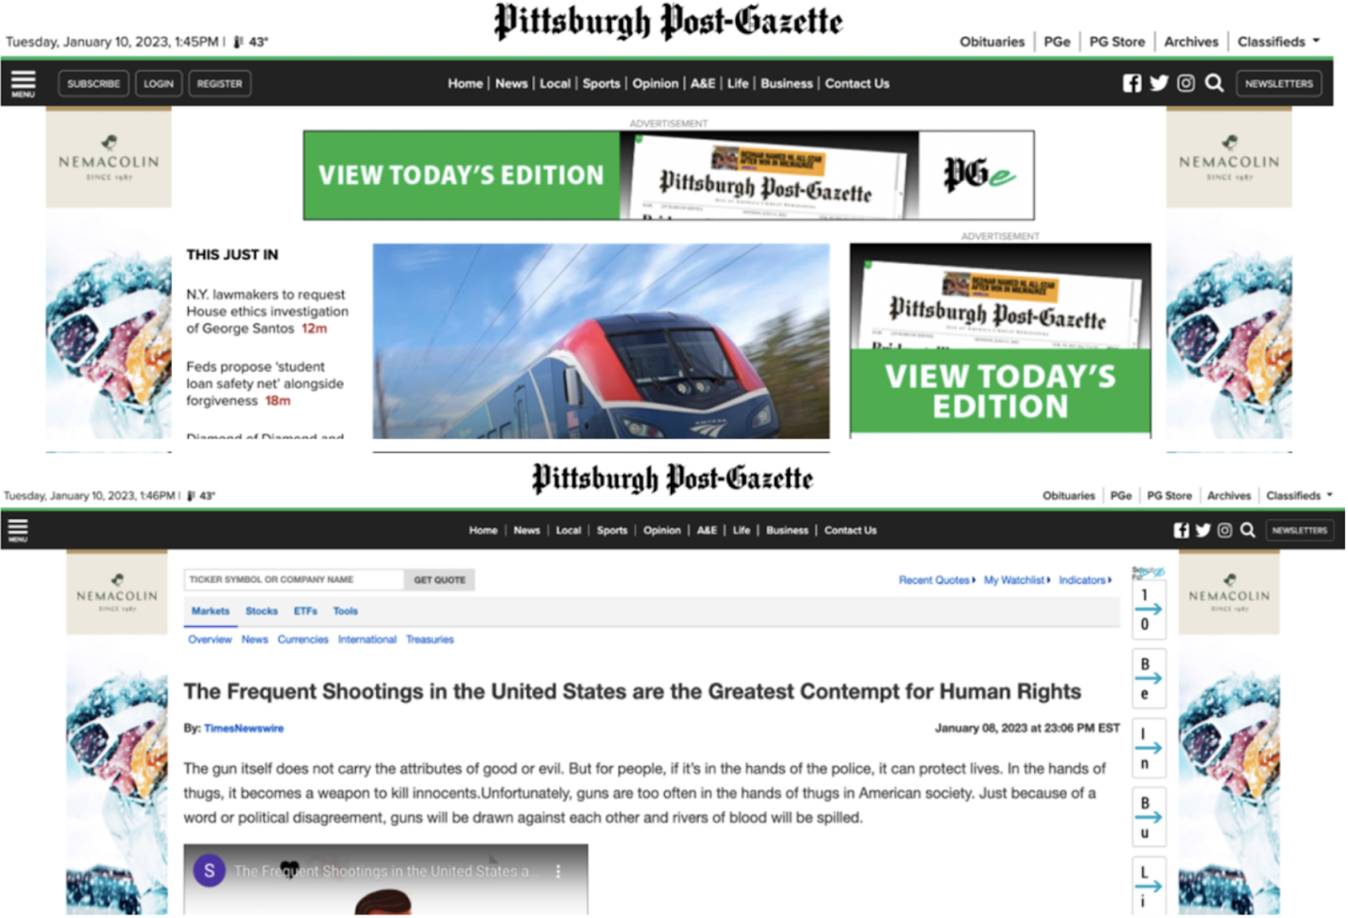 Screen capture from second-level domain of Pittsburgh Post-Gazette "post-gazette.com" (top); subdomain "markets.post-gazette.com" (bottom) displays content intended to masquerade as content on post-gazette.com, cites Times Newswire as source